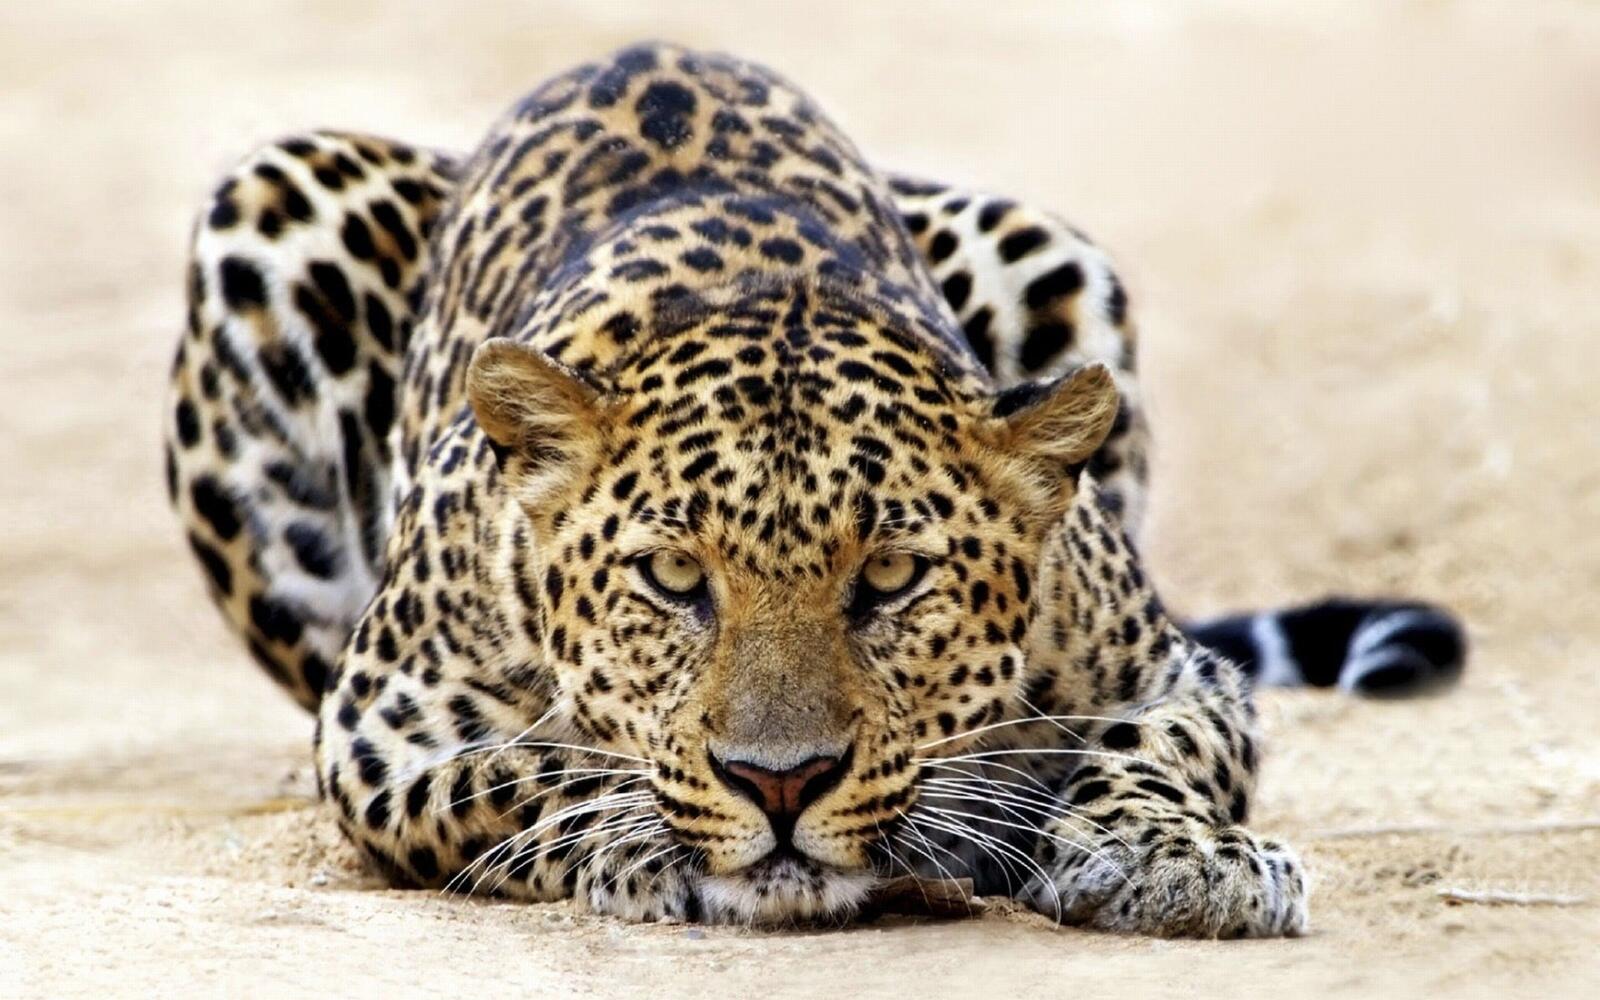 Free photo The leopard lies down and looks at the photographer